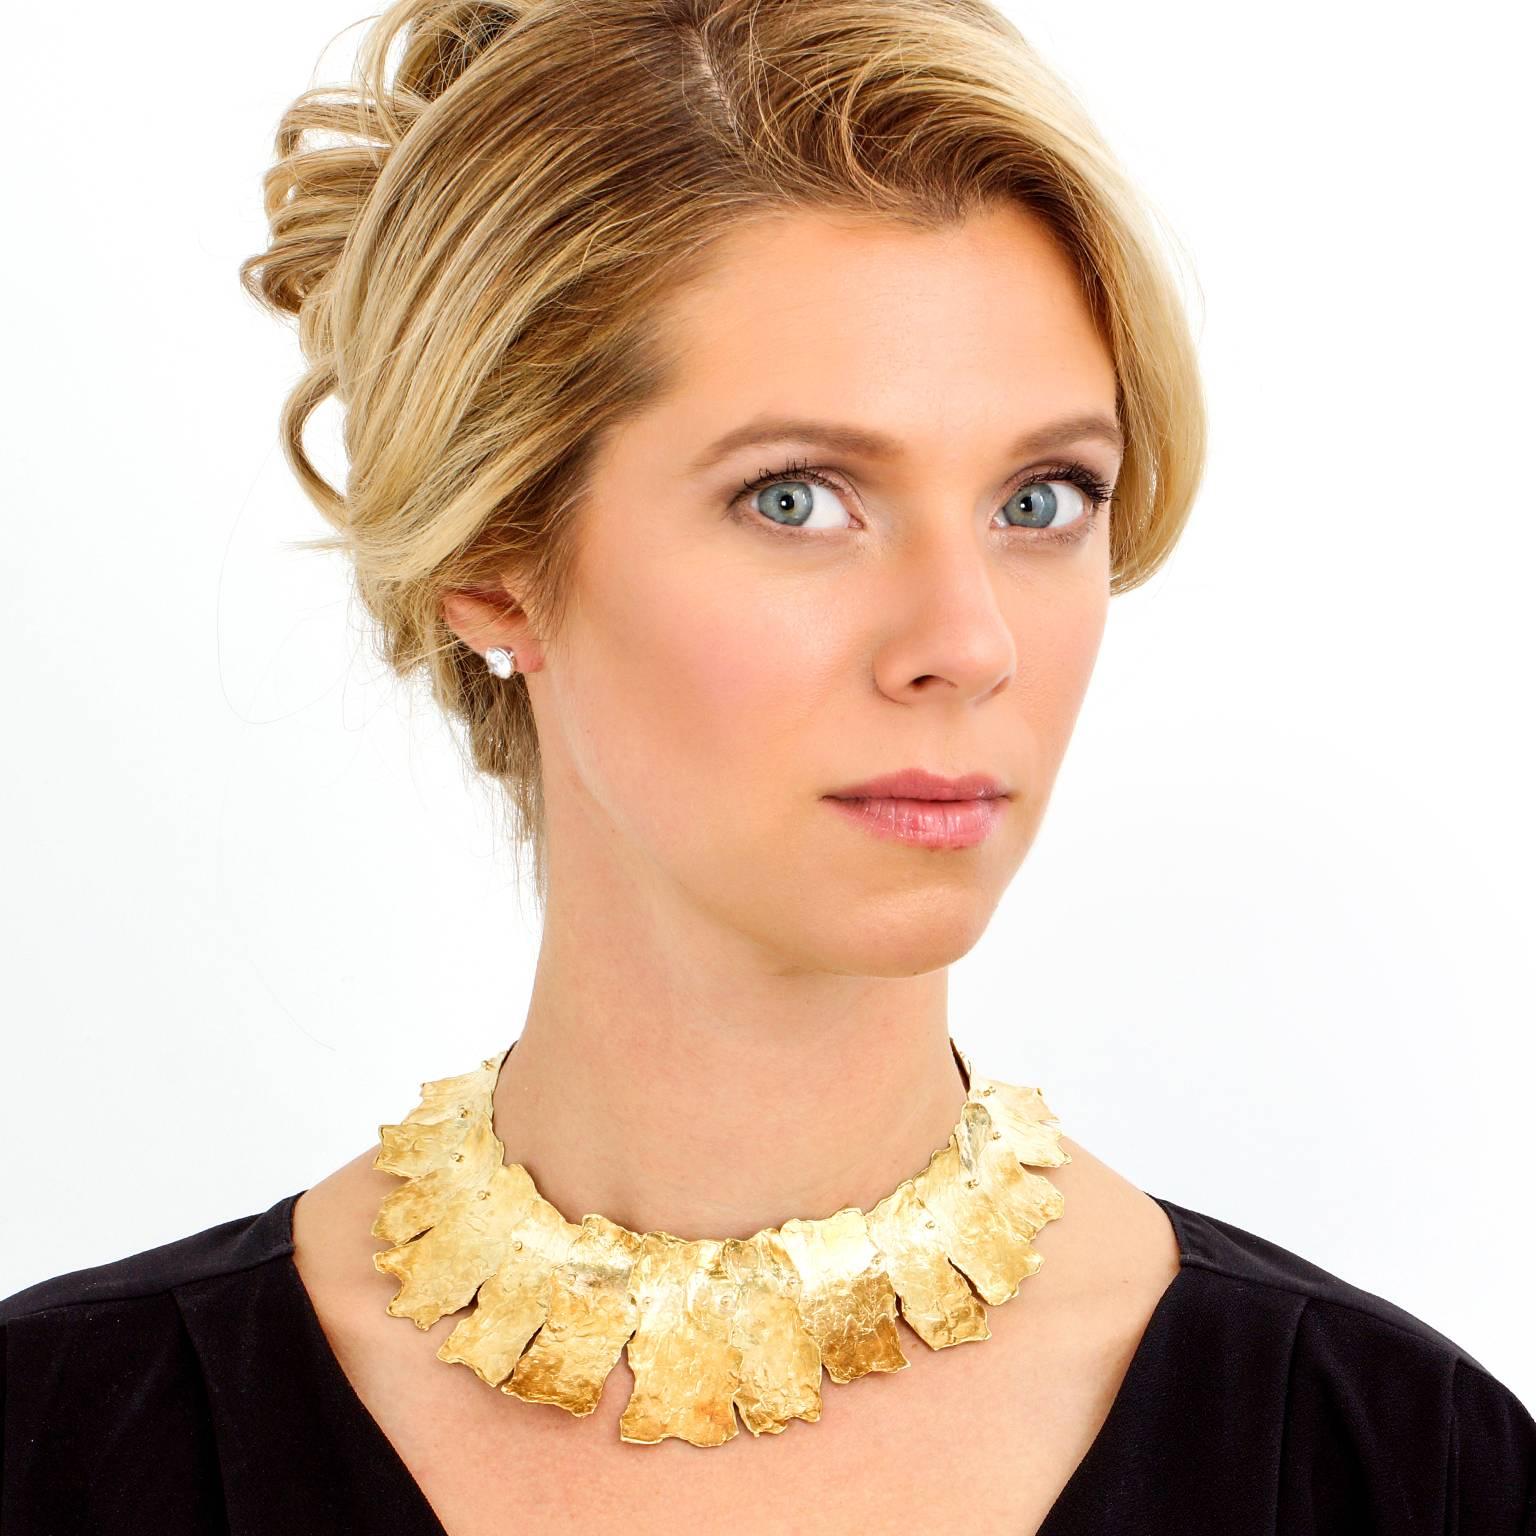 Circa 1970s, 18k, Ed Wiener, New York City.  Exquisitely made by modernist master goldsmith and visionary Ed Wiener, this gorgeous statement necklace features contoured, overlapping reticulated eighteen-karat gold plates. Impeccably stunning in